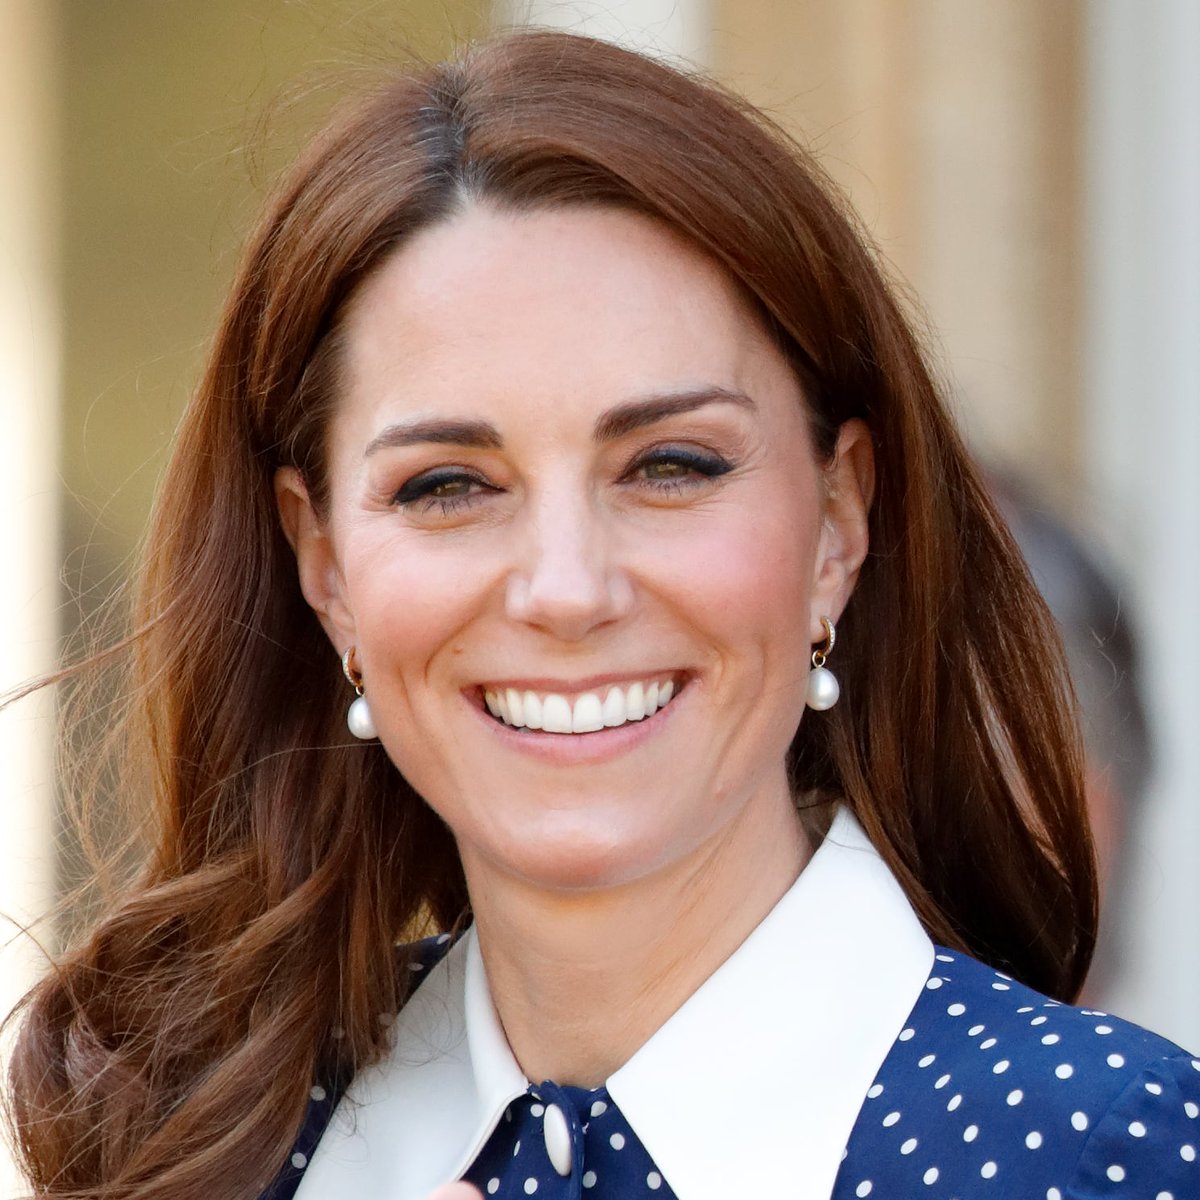 Today's Birthdays Sun Jan 9 2022 : golfer Sergio Garcia in 1980 (age 42) Kate Middleton (Duchess of Cambridge, wife of Prince William) in 1982 (age 40) (pic) musician Jimmy Page (Led Zeppelin) in 1944 (age 78) bandleader Dave Matthews in 1967 (age 55) #OnThisDay #OTD 3/3 https://t.co/yZiwHyrD4M